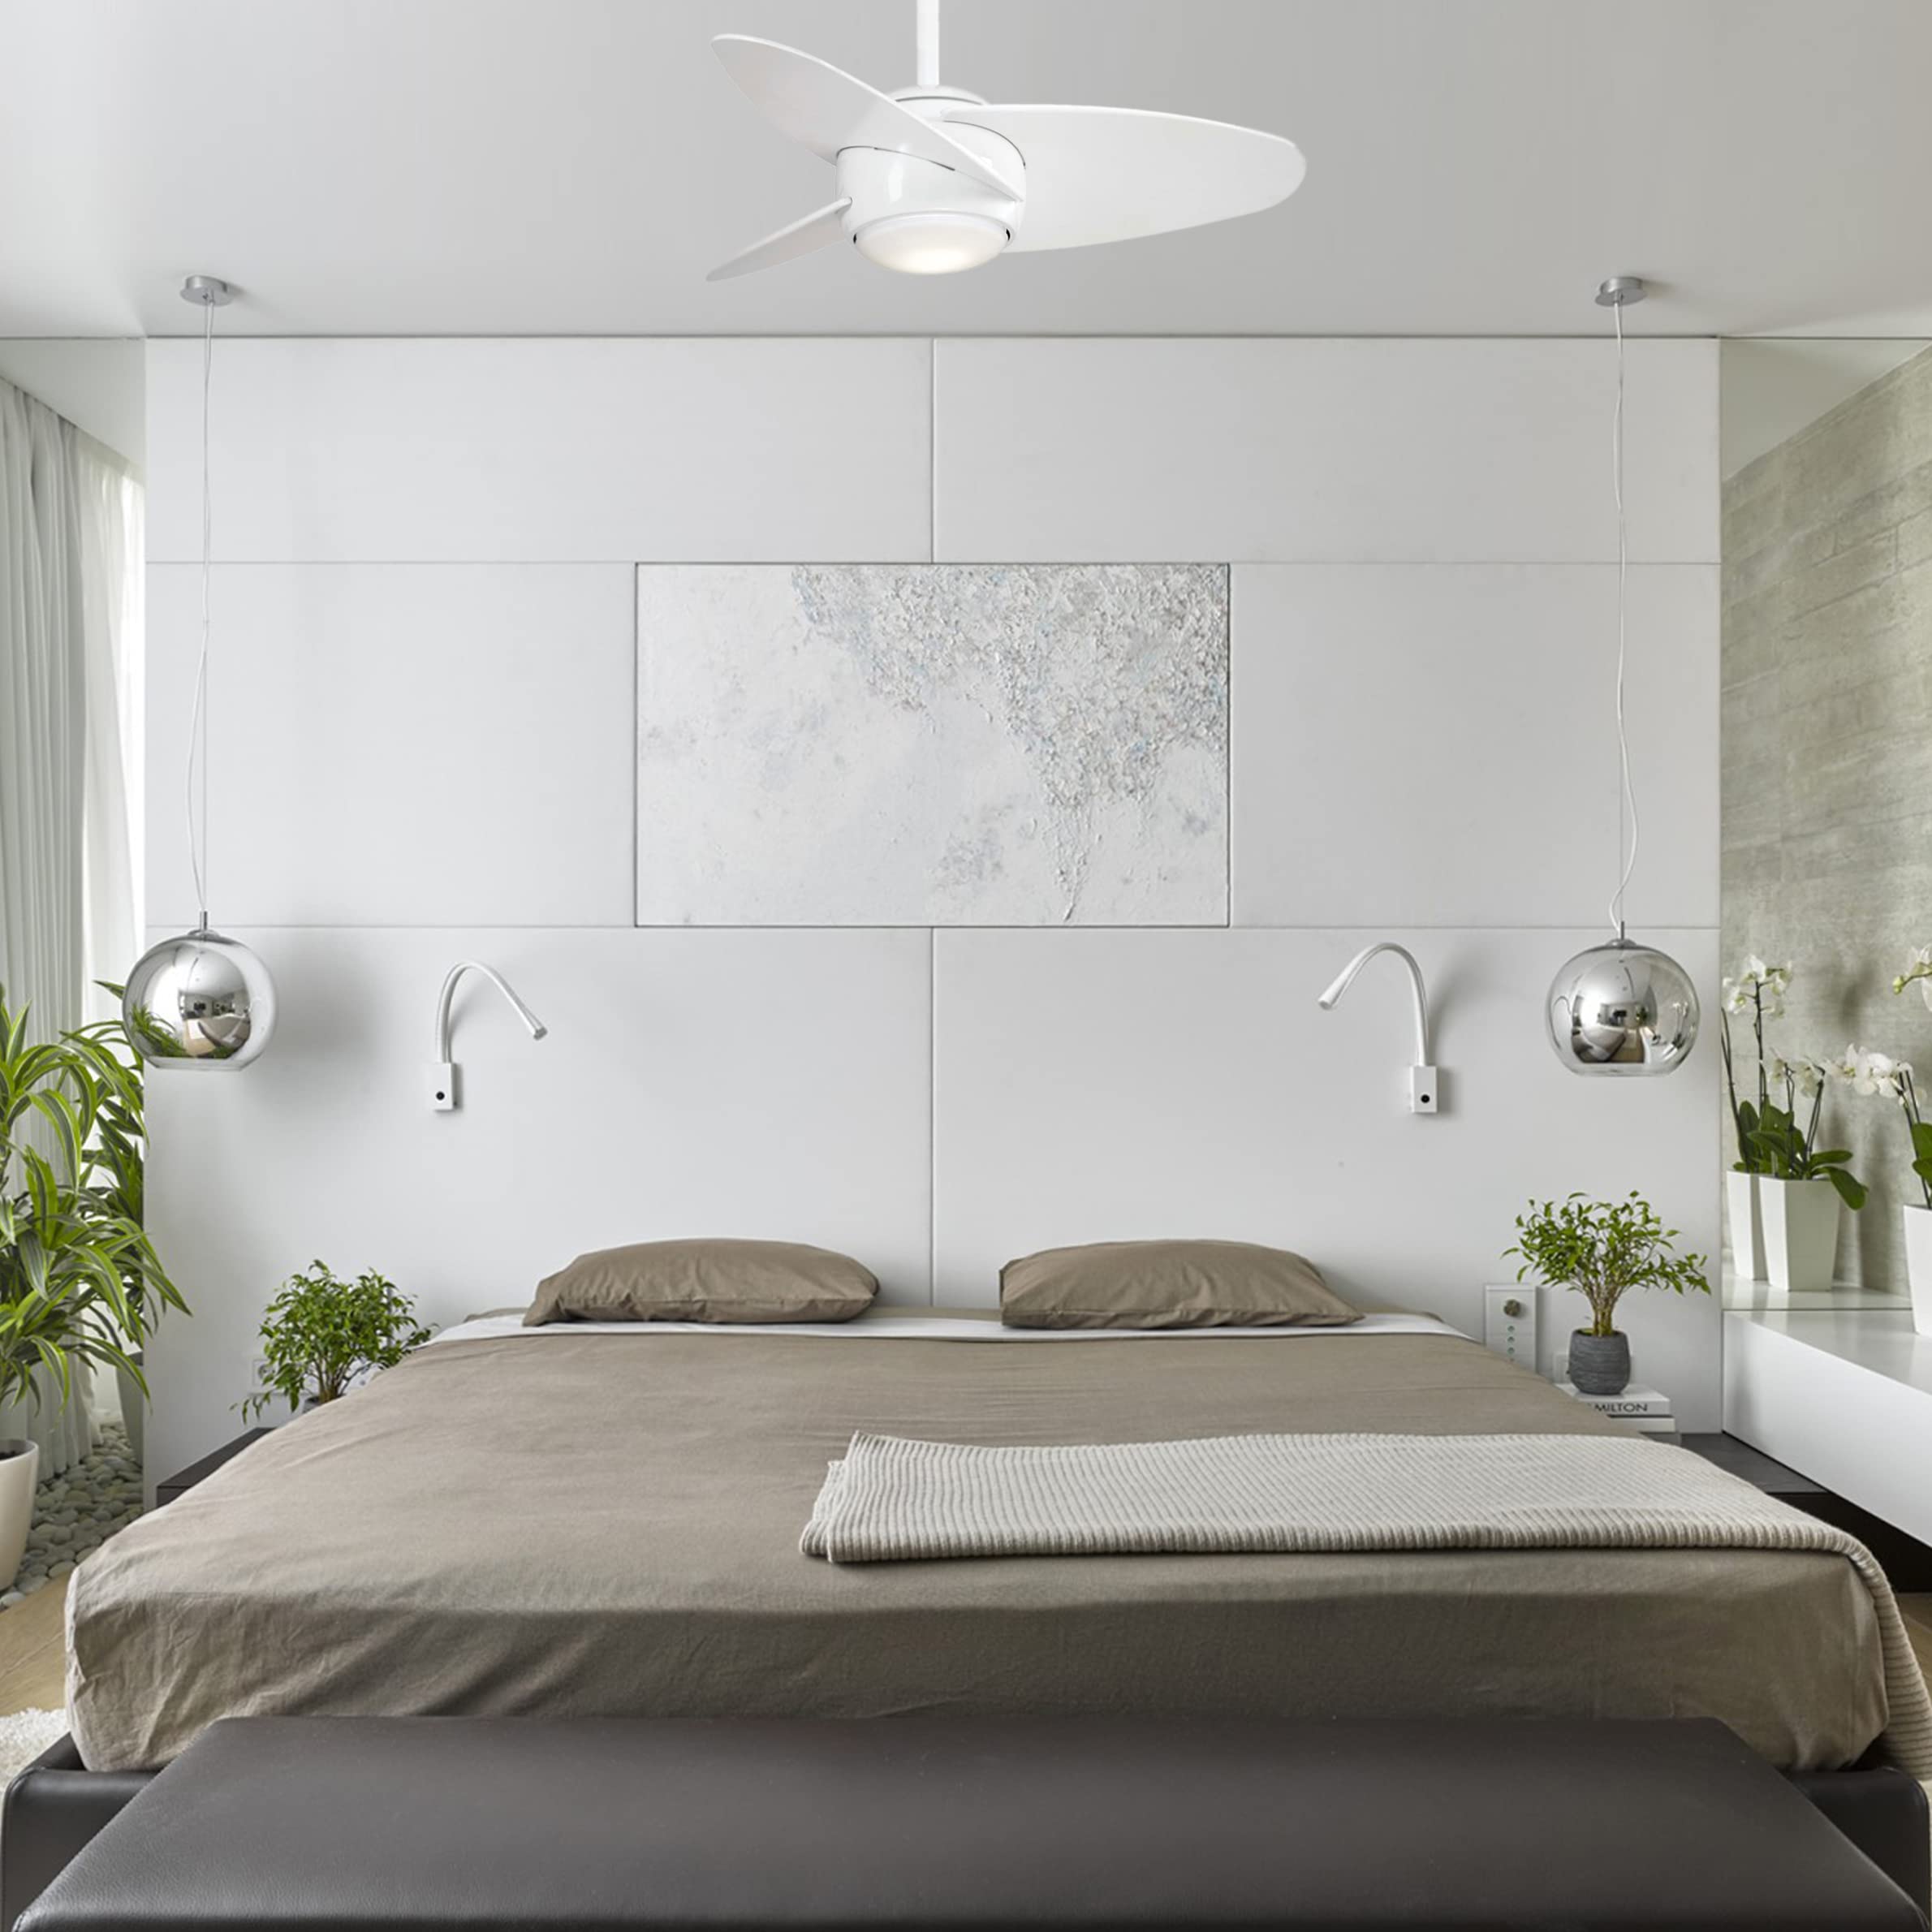 MINKA-AIRE F410L-WH Slant 36 Inch Ceiling Fan with DC Motor and Integrated 18W LED Light Kit in White Finish